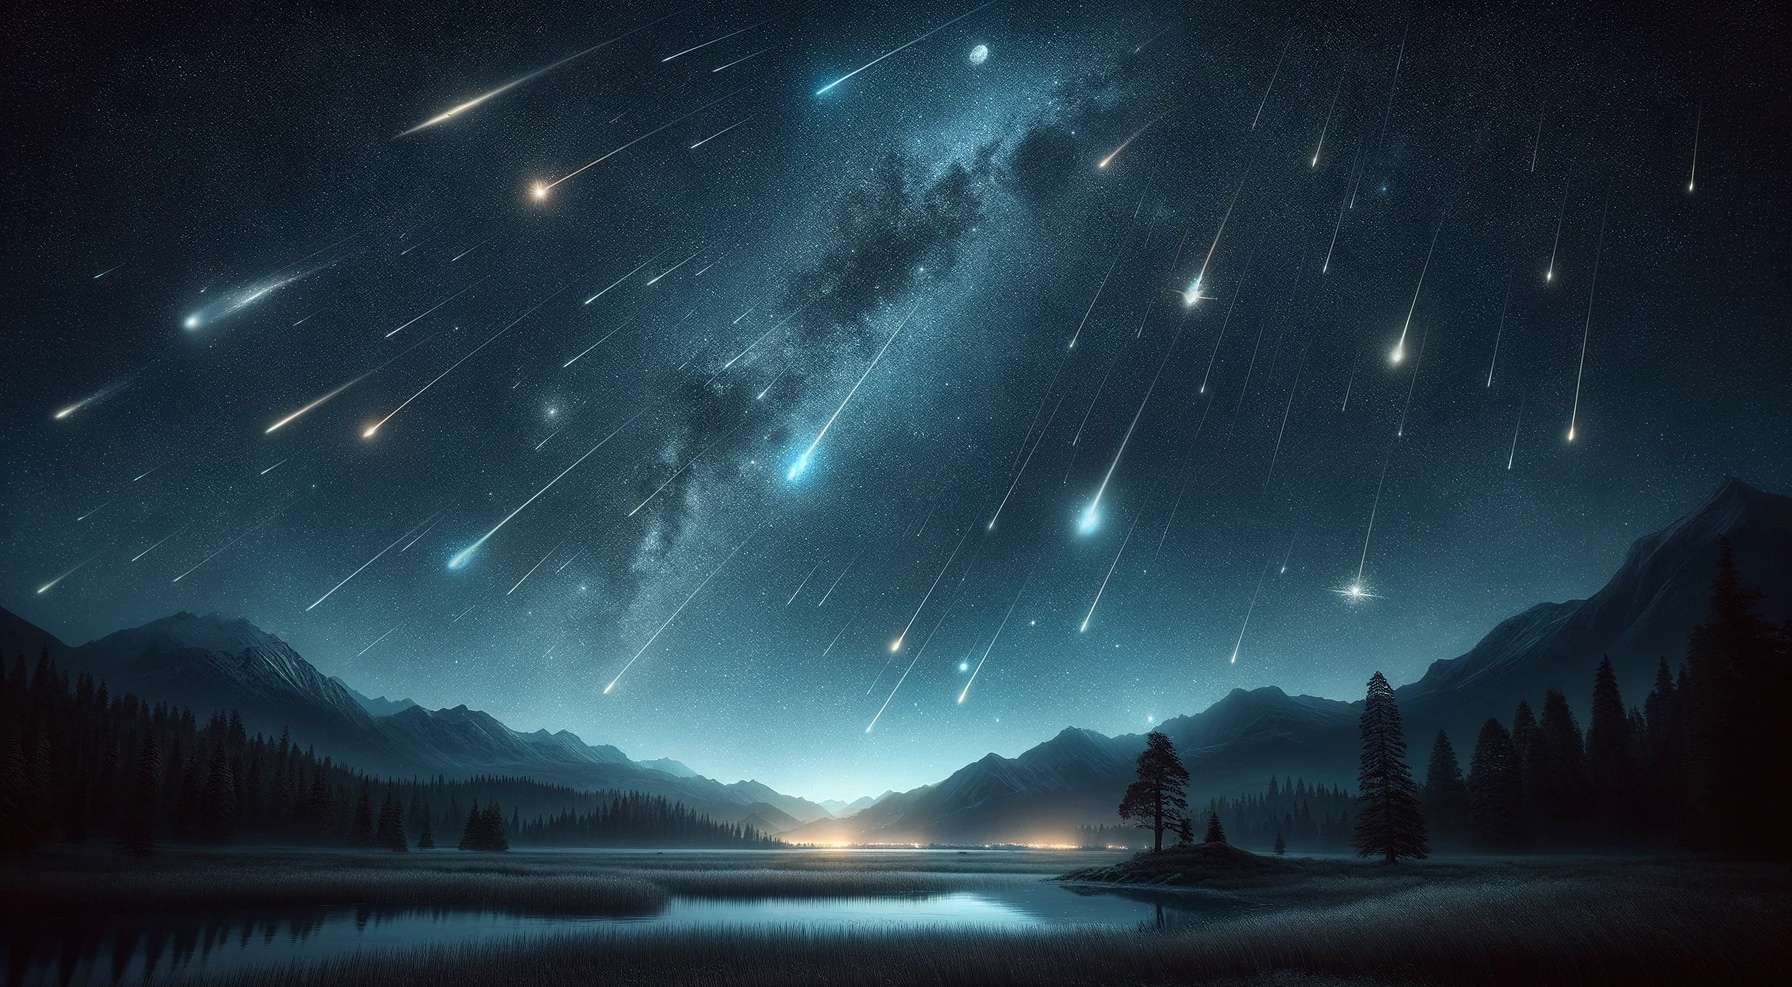 The true origin of Geminid stones, one of the most beautiful meteor showers